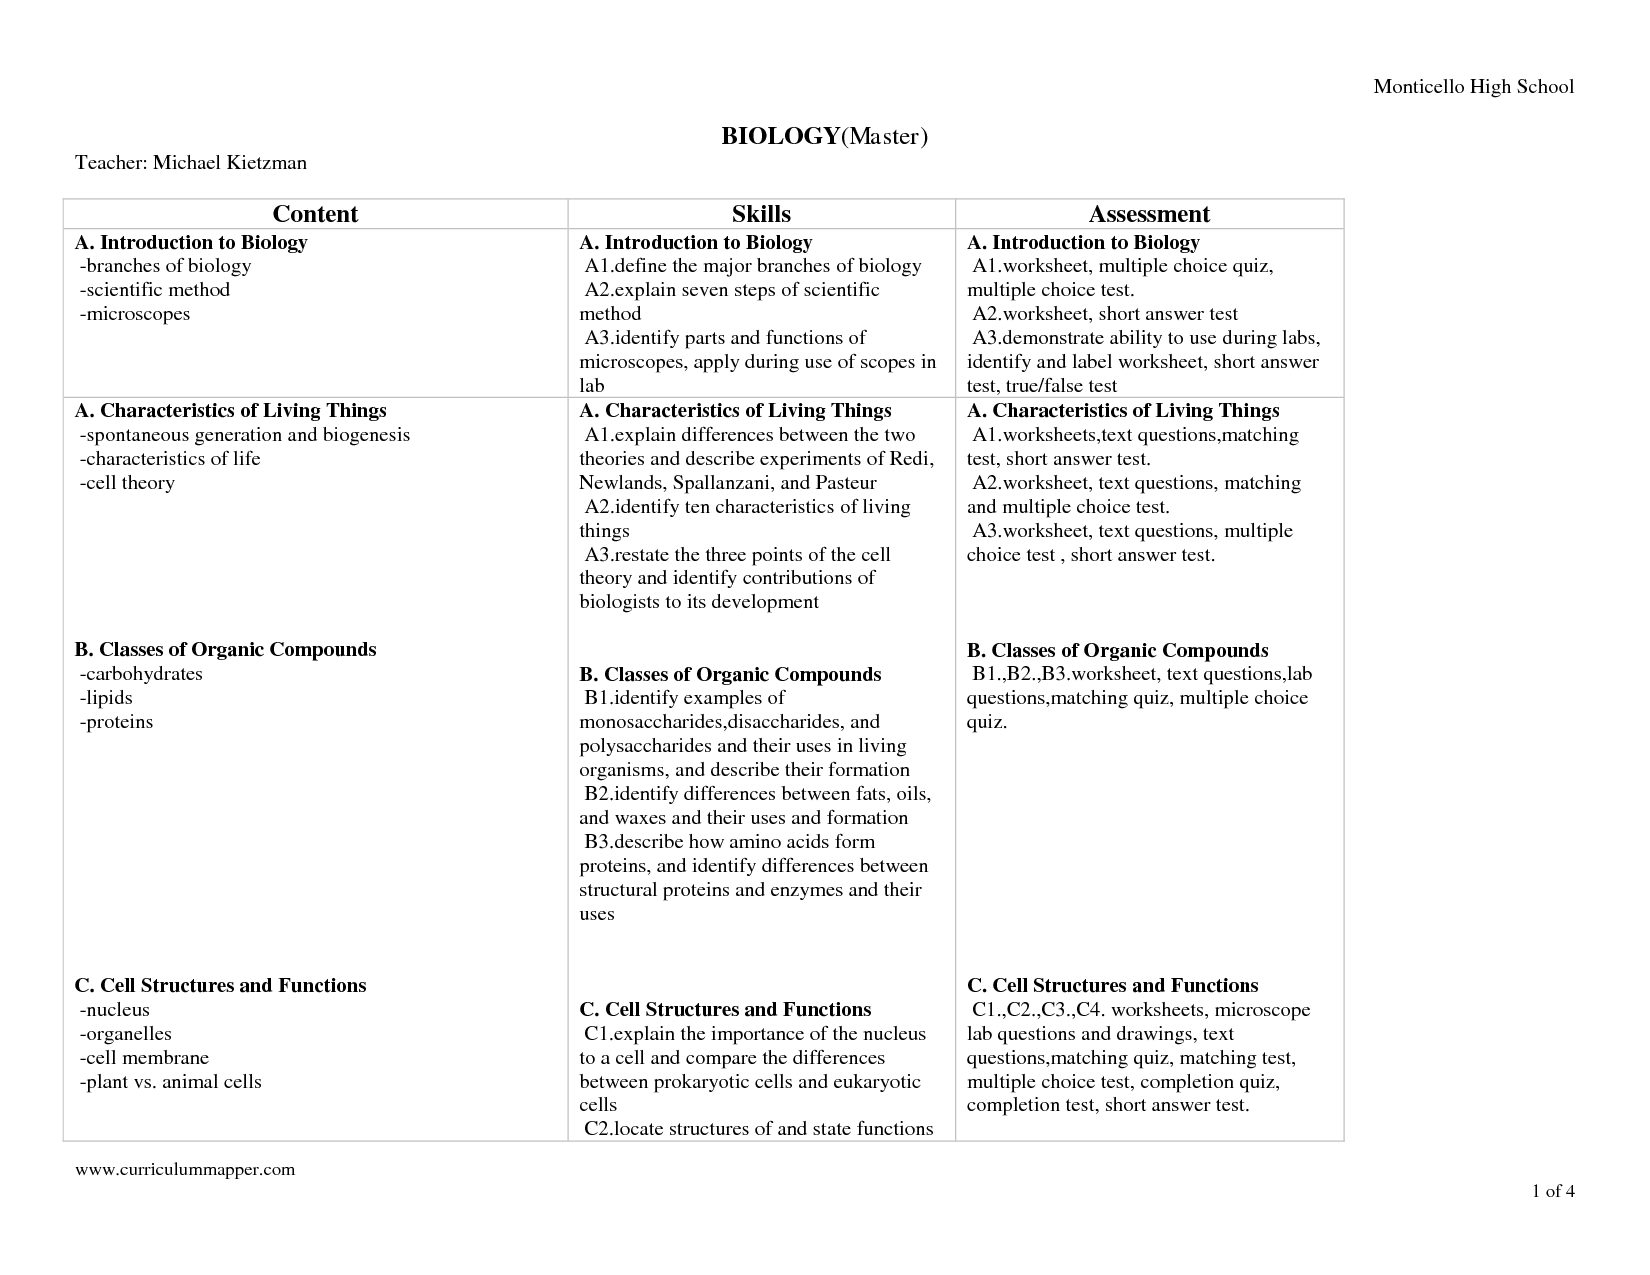 14 Best Images of Comparing DNA And RNA Worksheet - Section 12 4